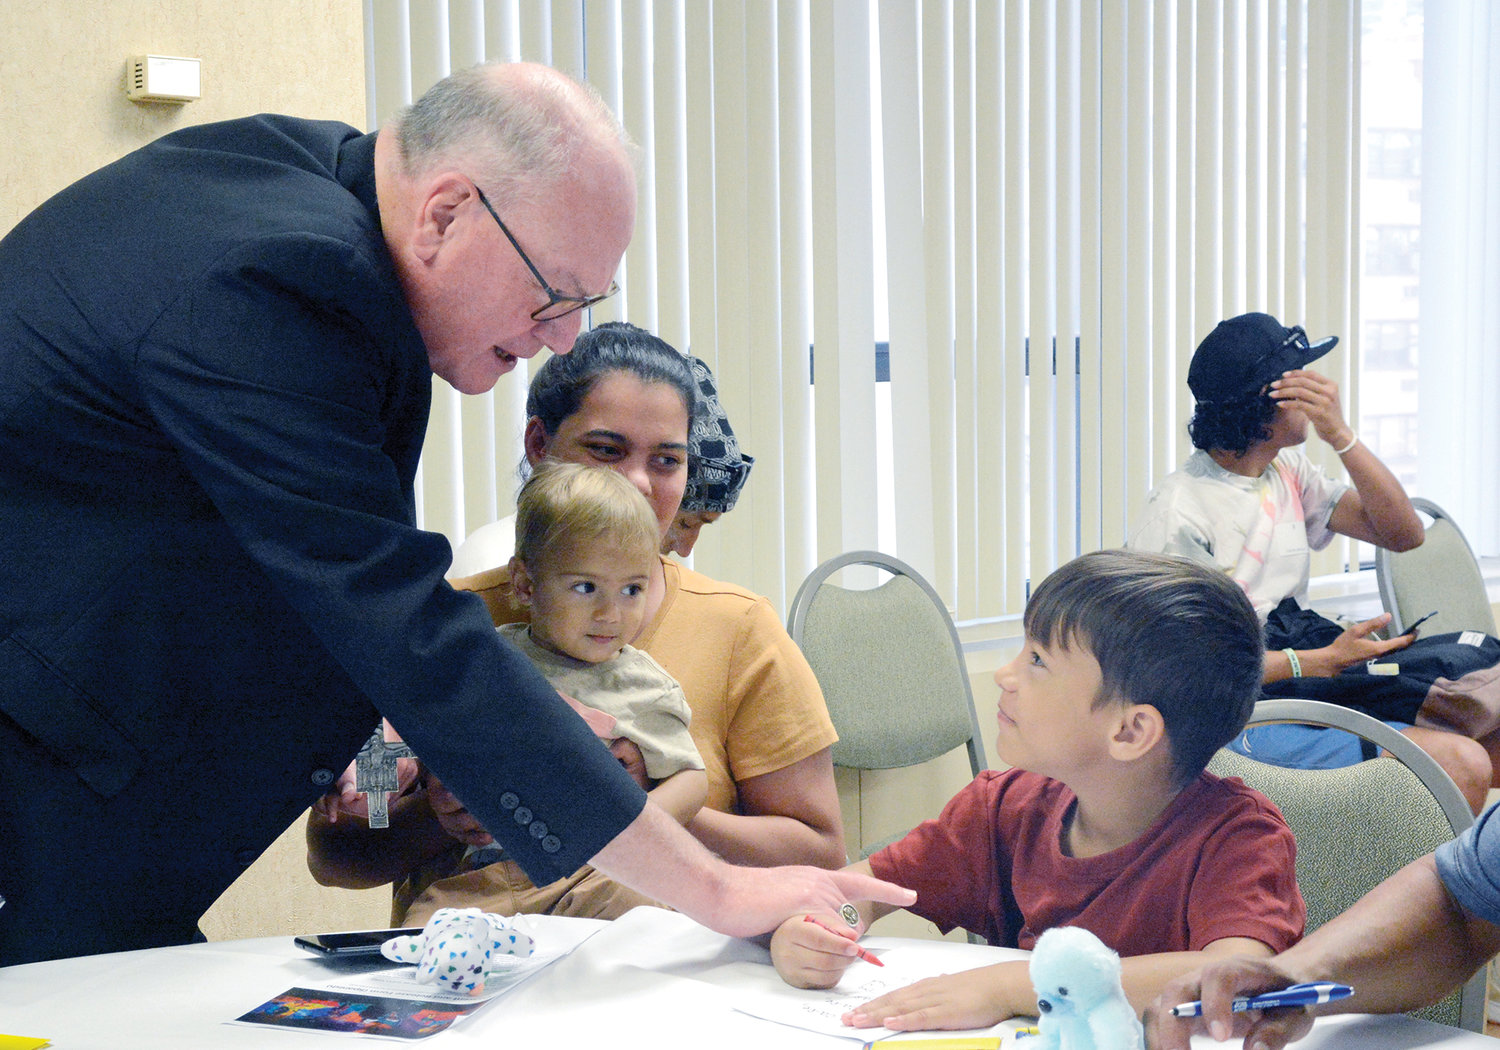 Cardinal Dolan visits with migrant families Aug. 16 inside the New York Catholic Center in Manhattan.